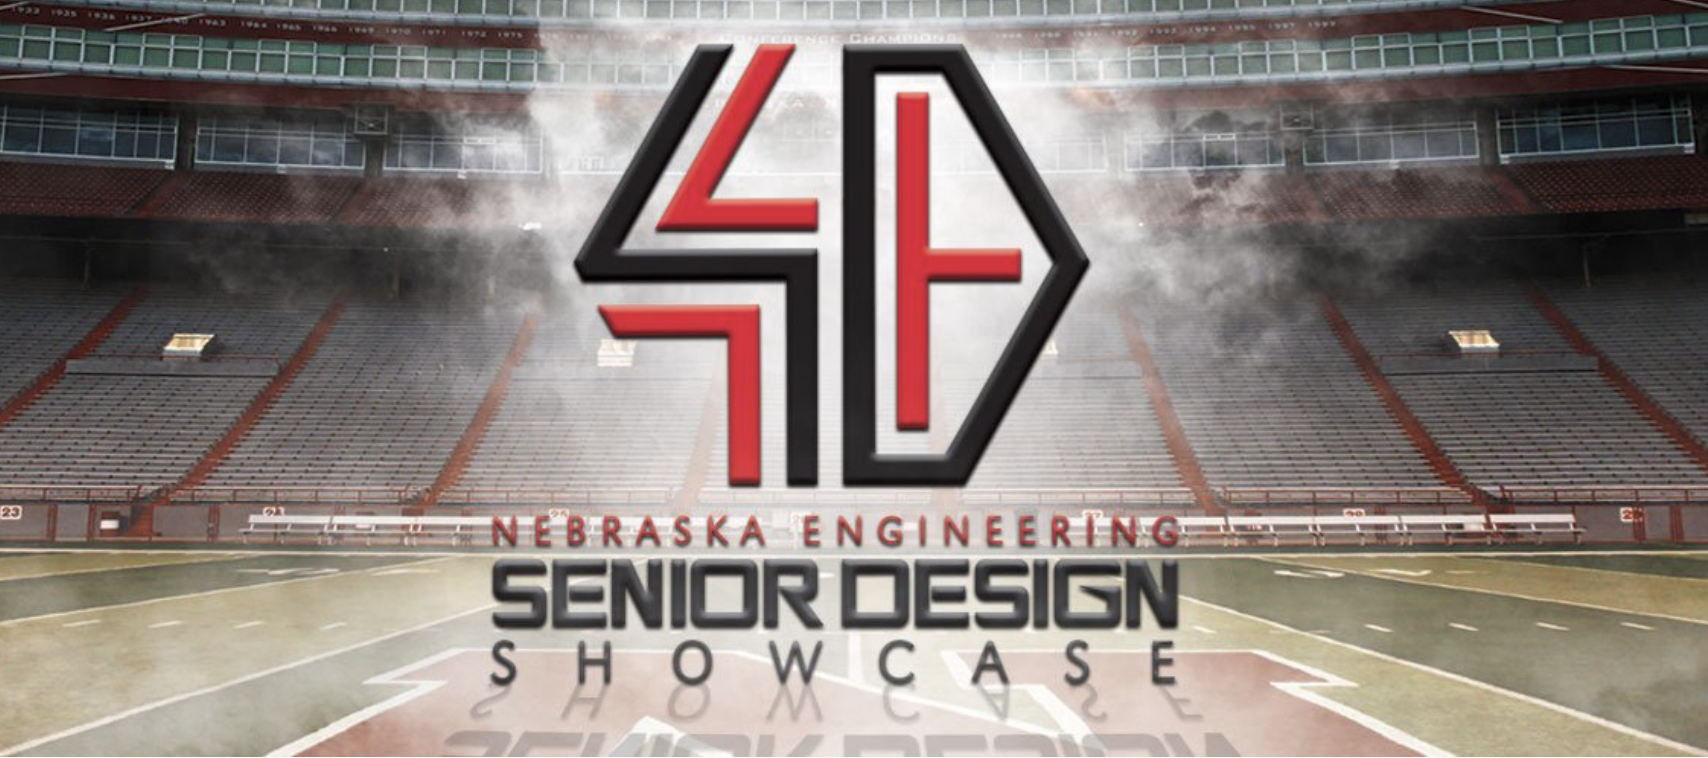 Celebrate your senior design capstone team by submitting information about your work.